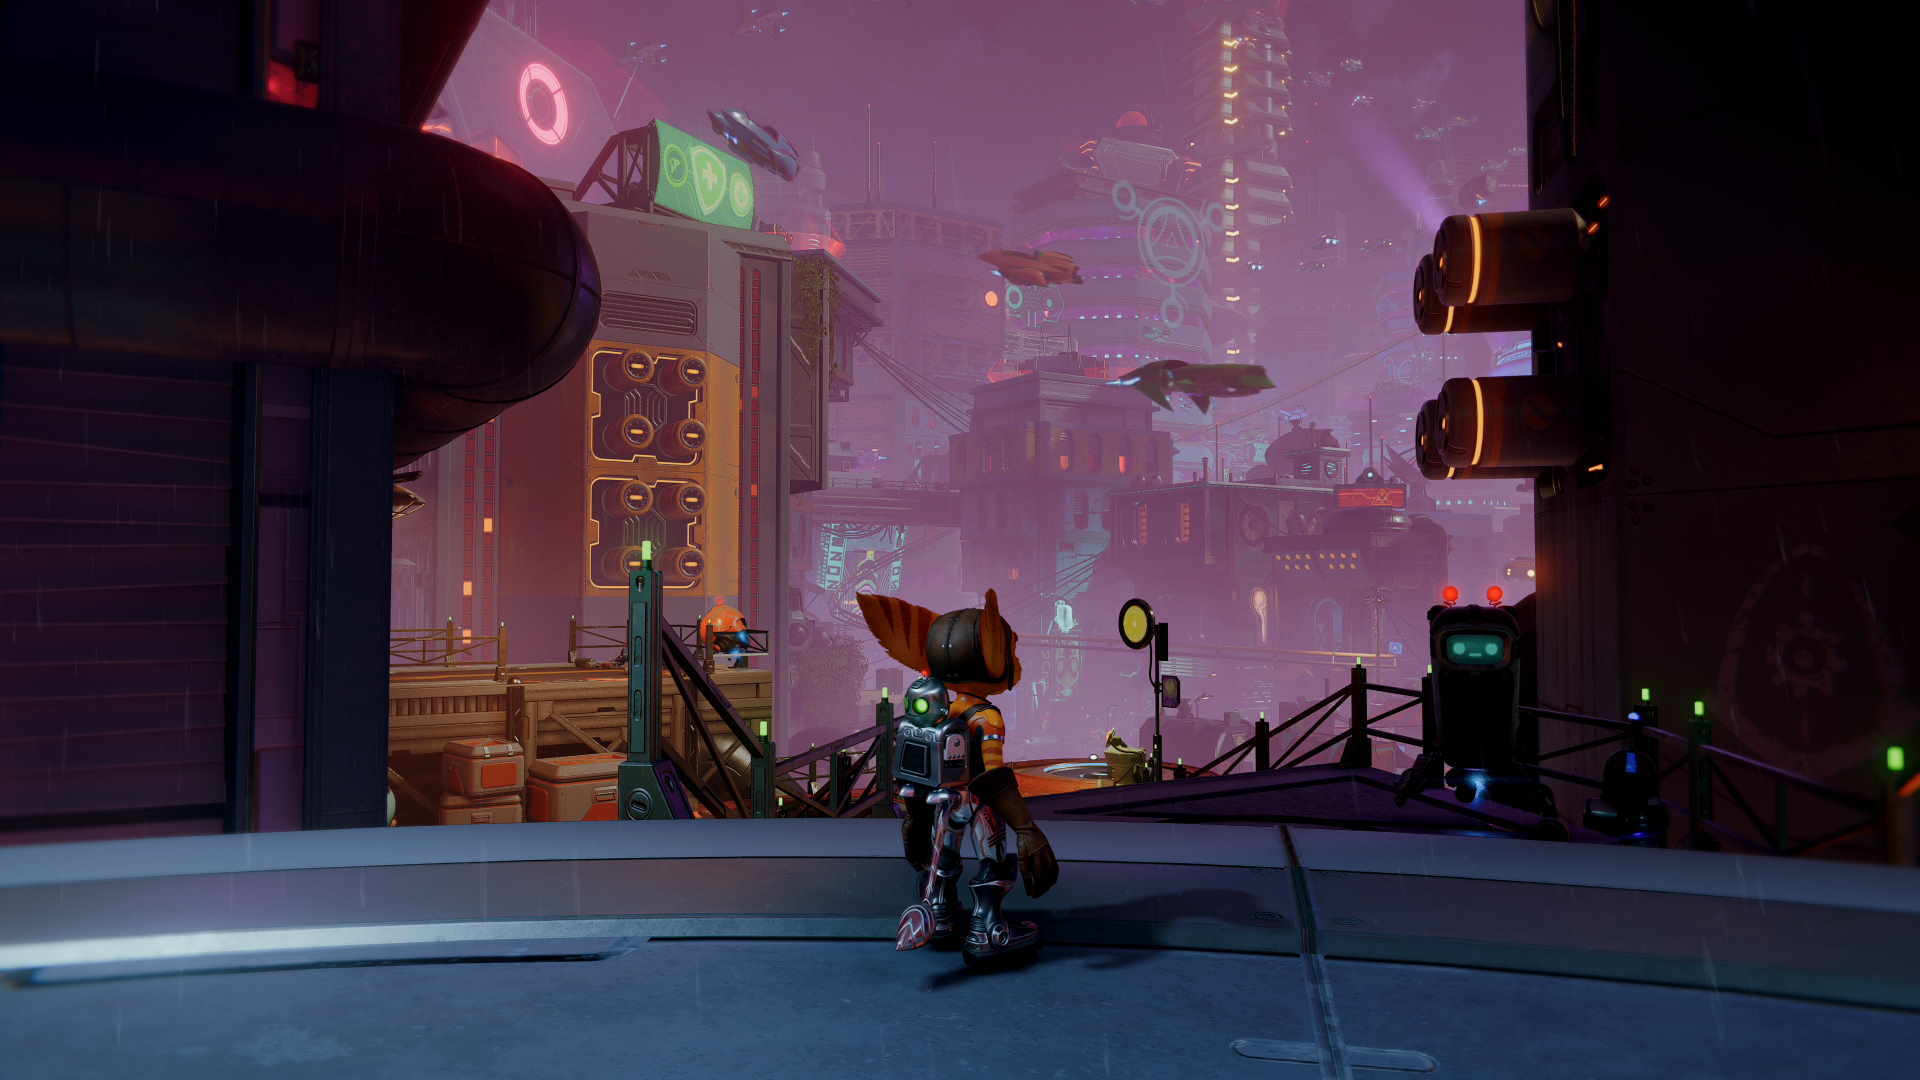 Ratchet & Clank: Rift Apart won't be on PS4, according to